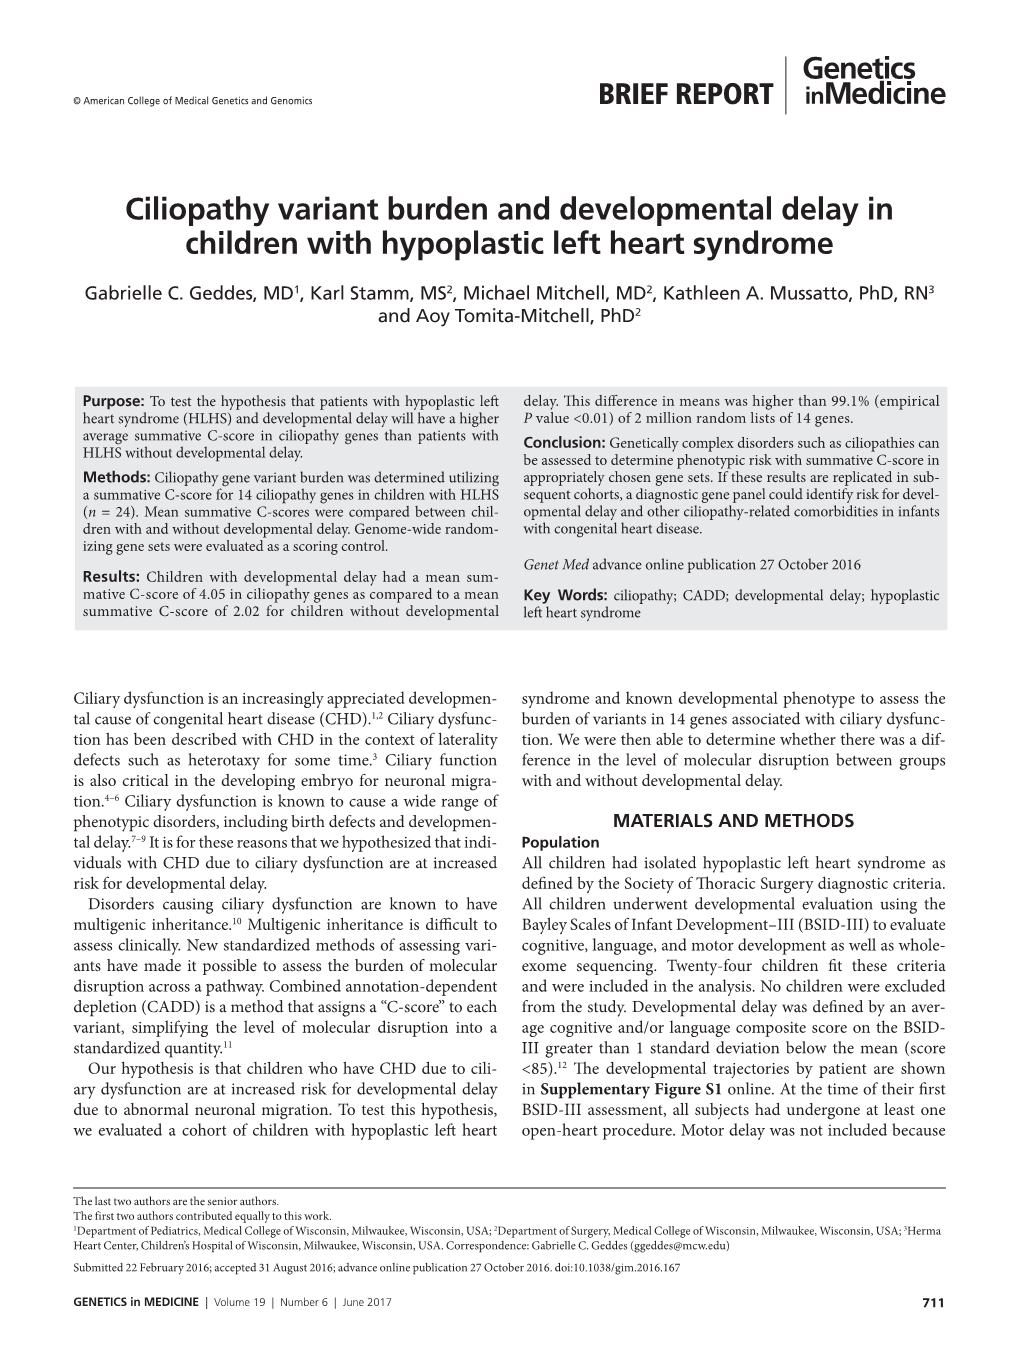 Ciliopathy Variant Burden and Developmental Delay in Children with Hypoplastic Left Heart Syndrome